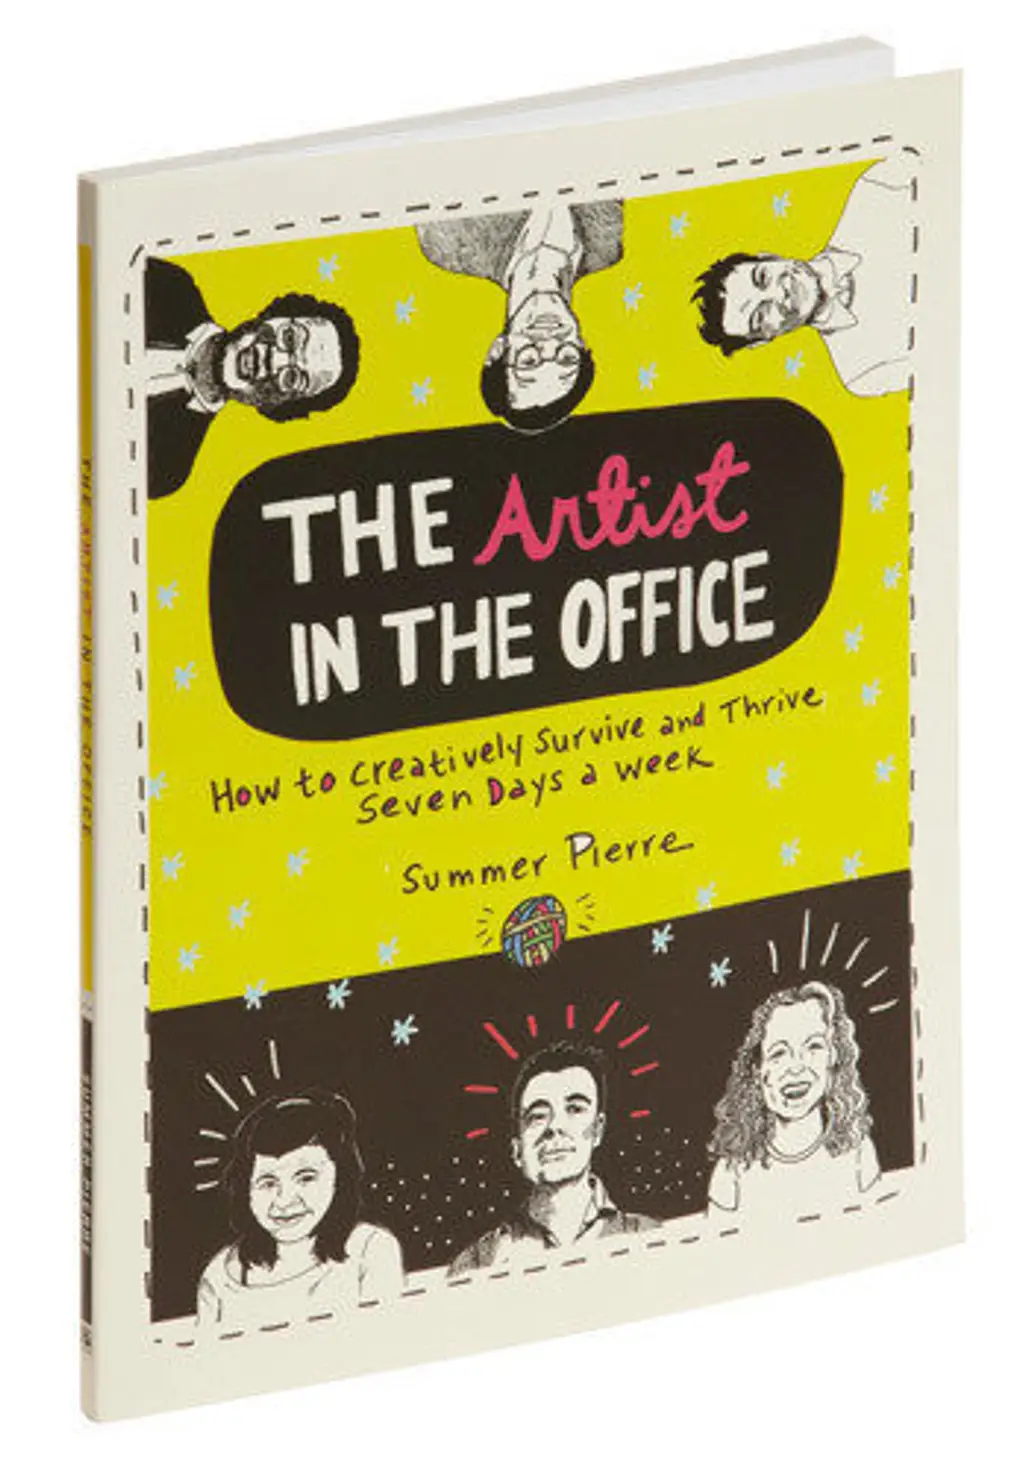 “the Artists in the Office” by Summer Pierre